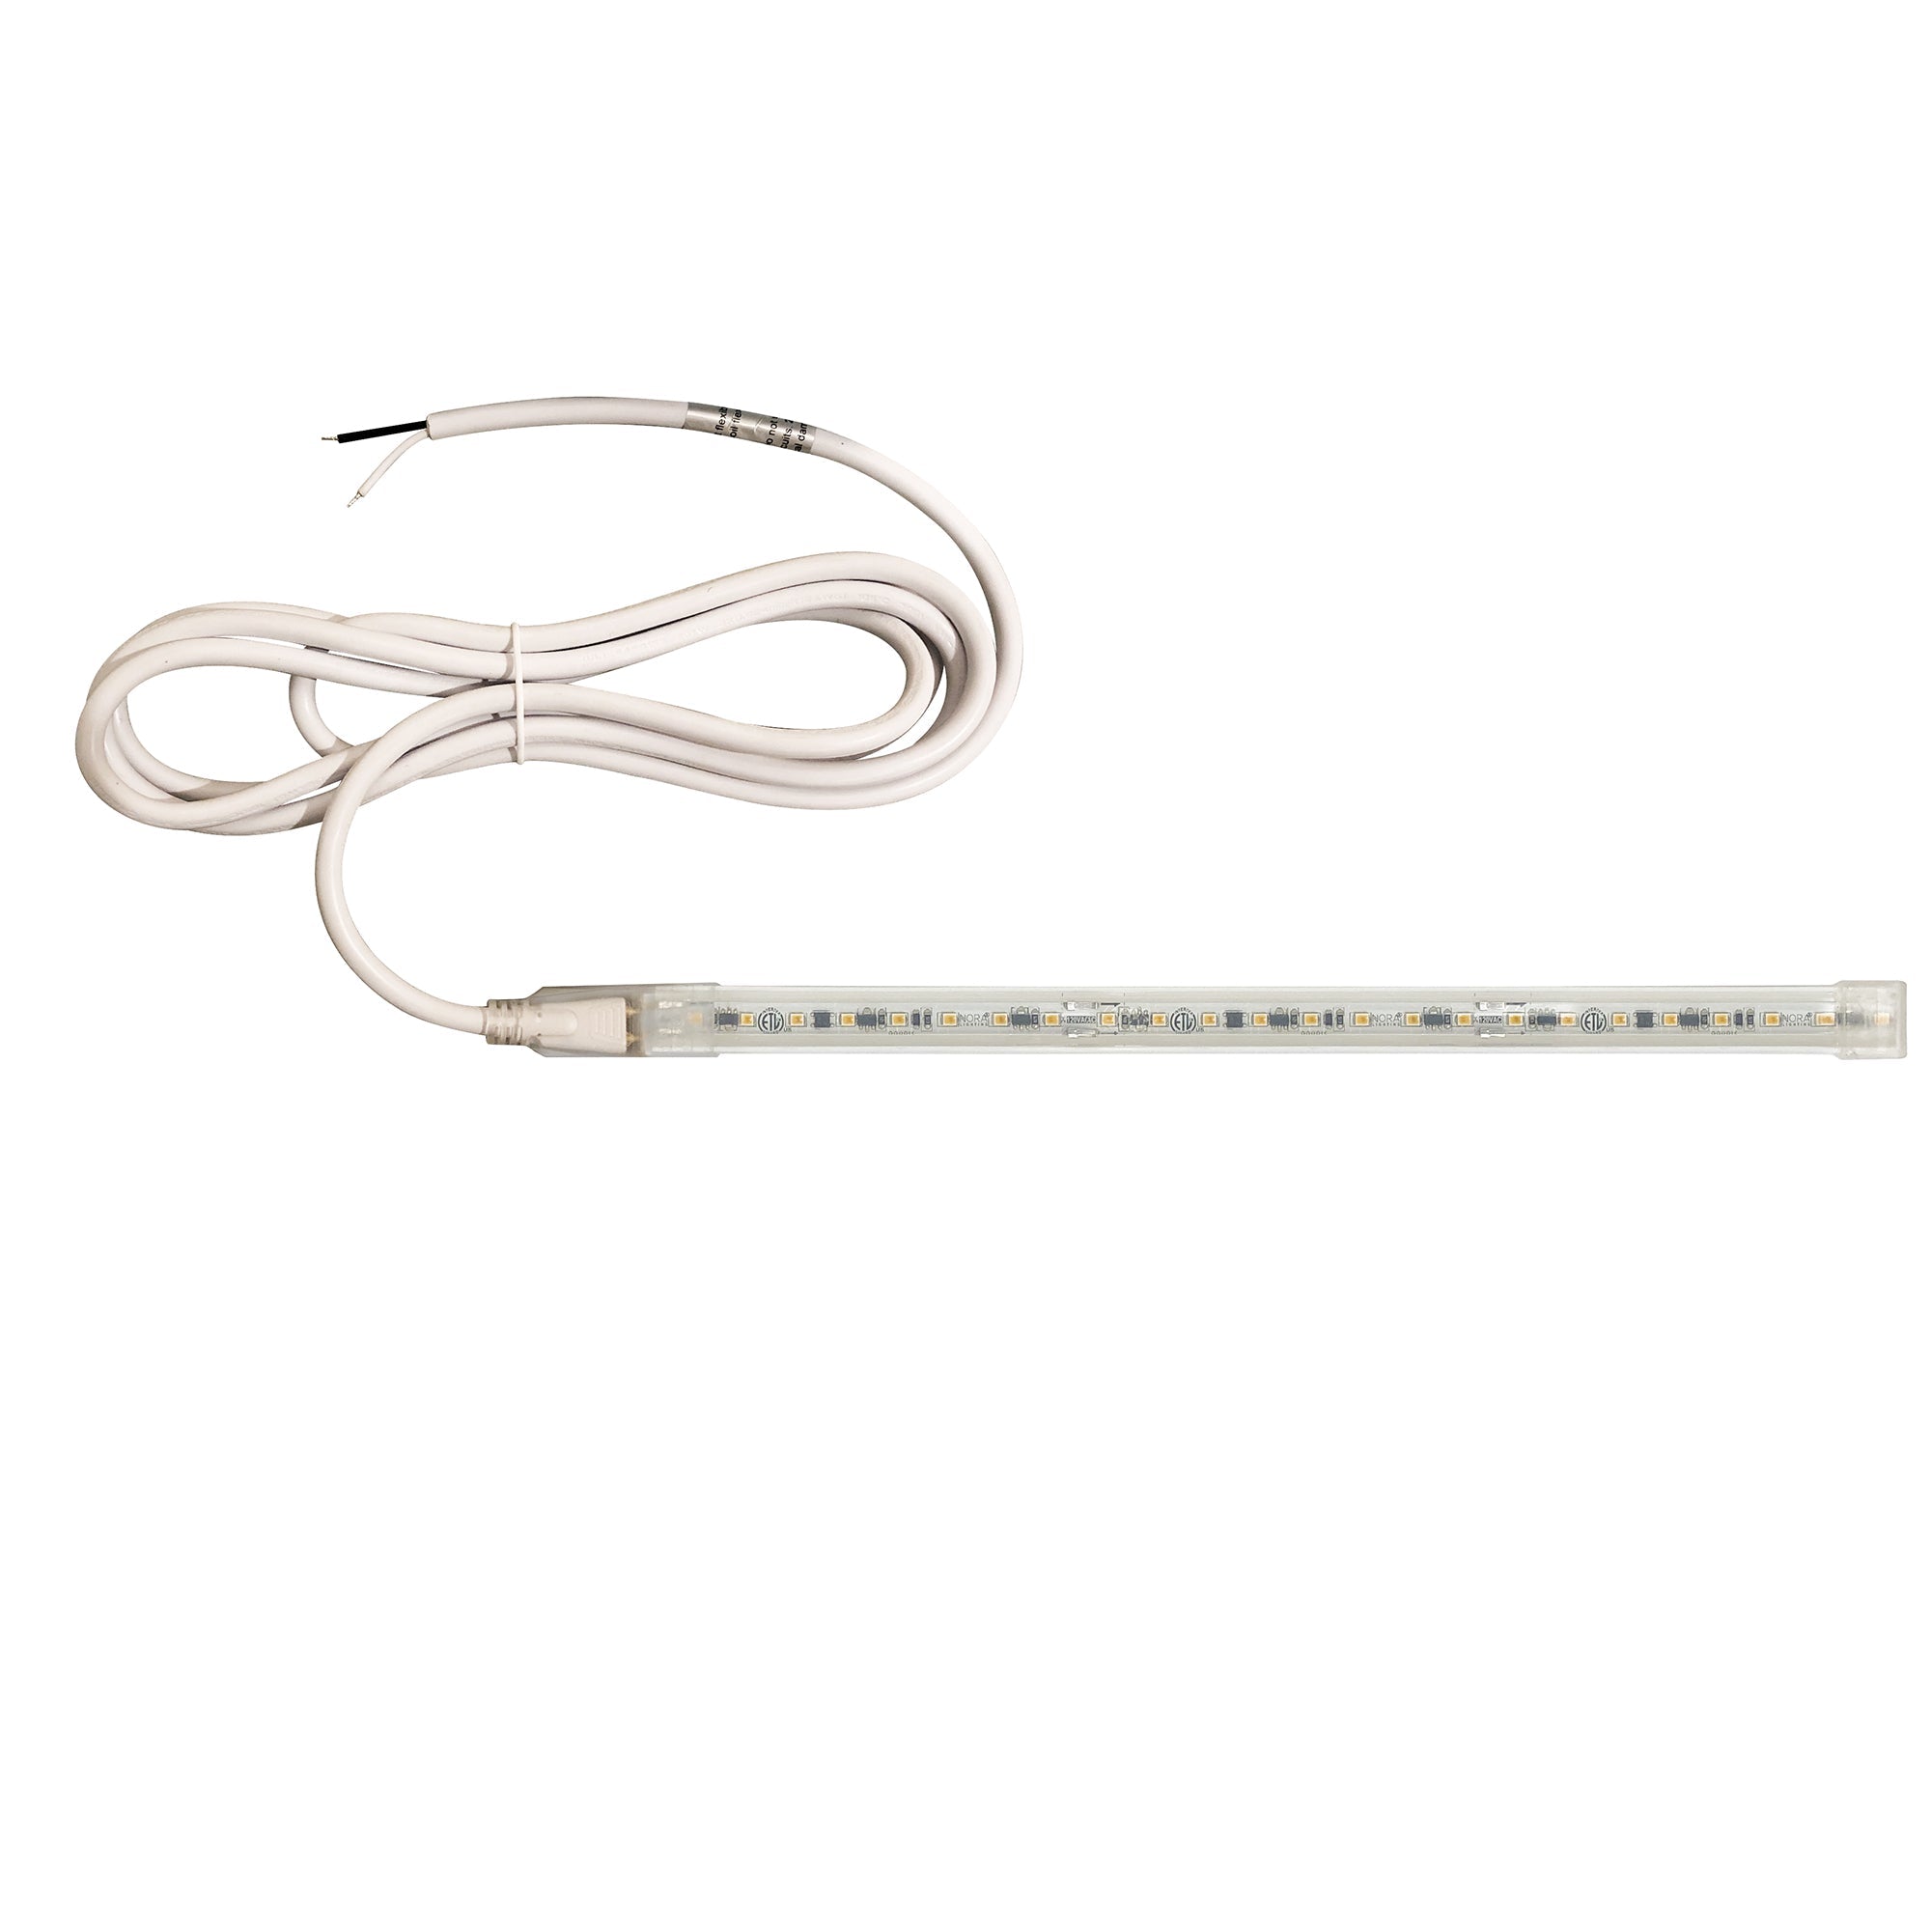 Nora Lighting NUTP13-W43-8-12-930/HW - Accent / Undercabinet - Custom Cut 43-ft, 8-in 120V Continuous LED Tape Light, 330lm / 3.6W per foot, 3000K, w/ Mounting Clips and 8' Hardwired Power Cord